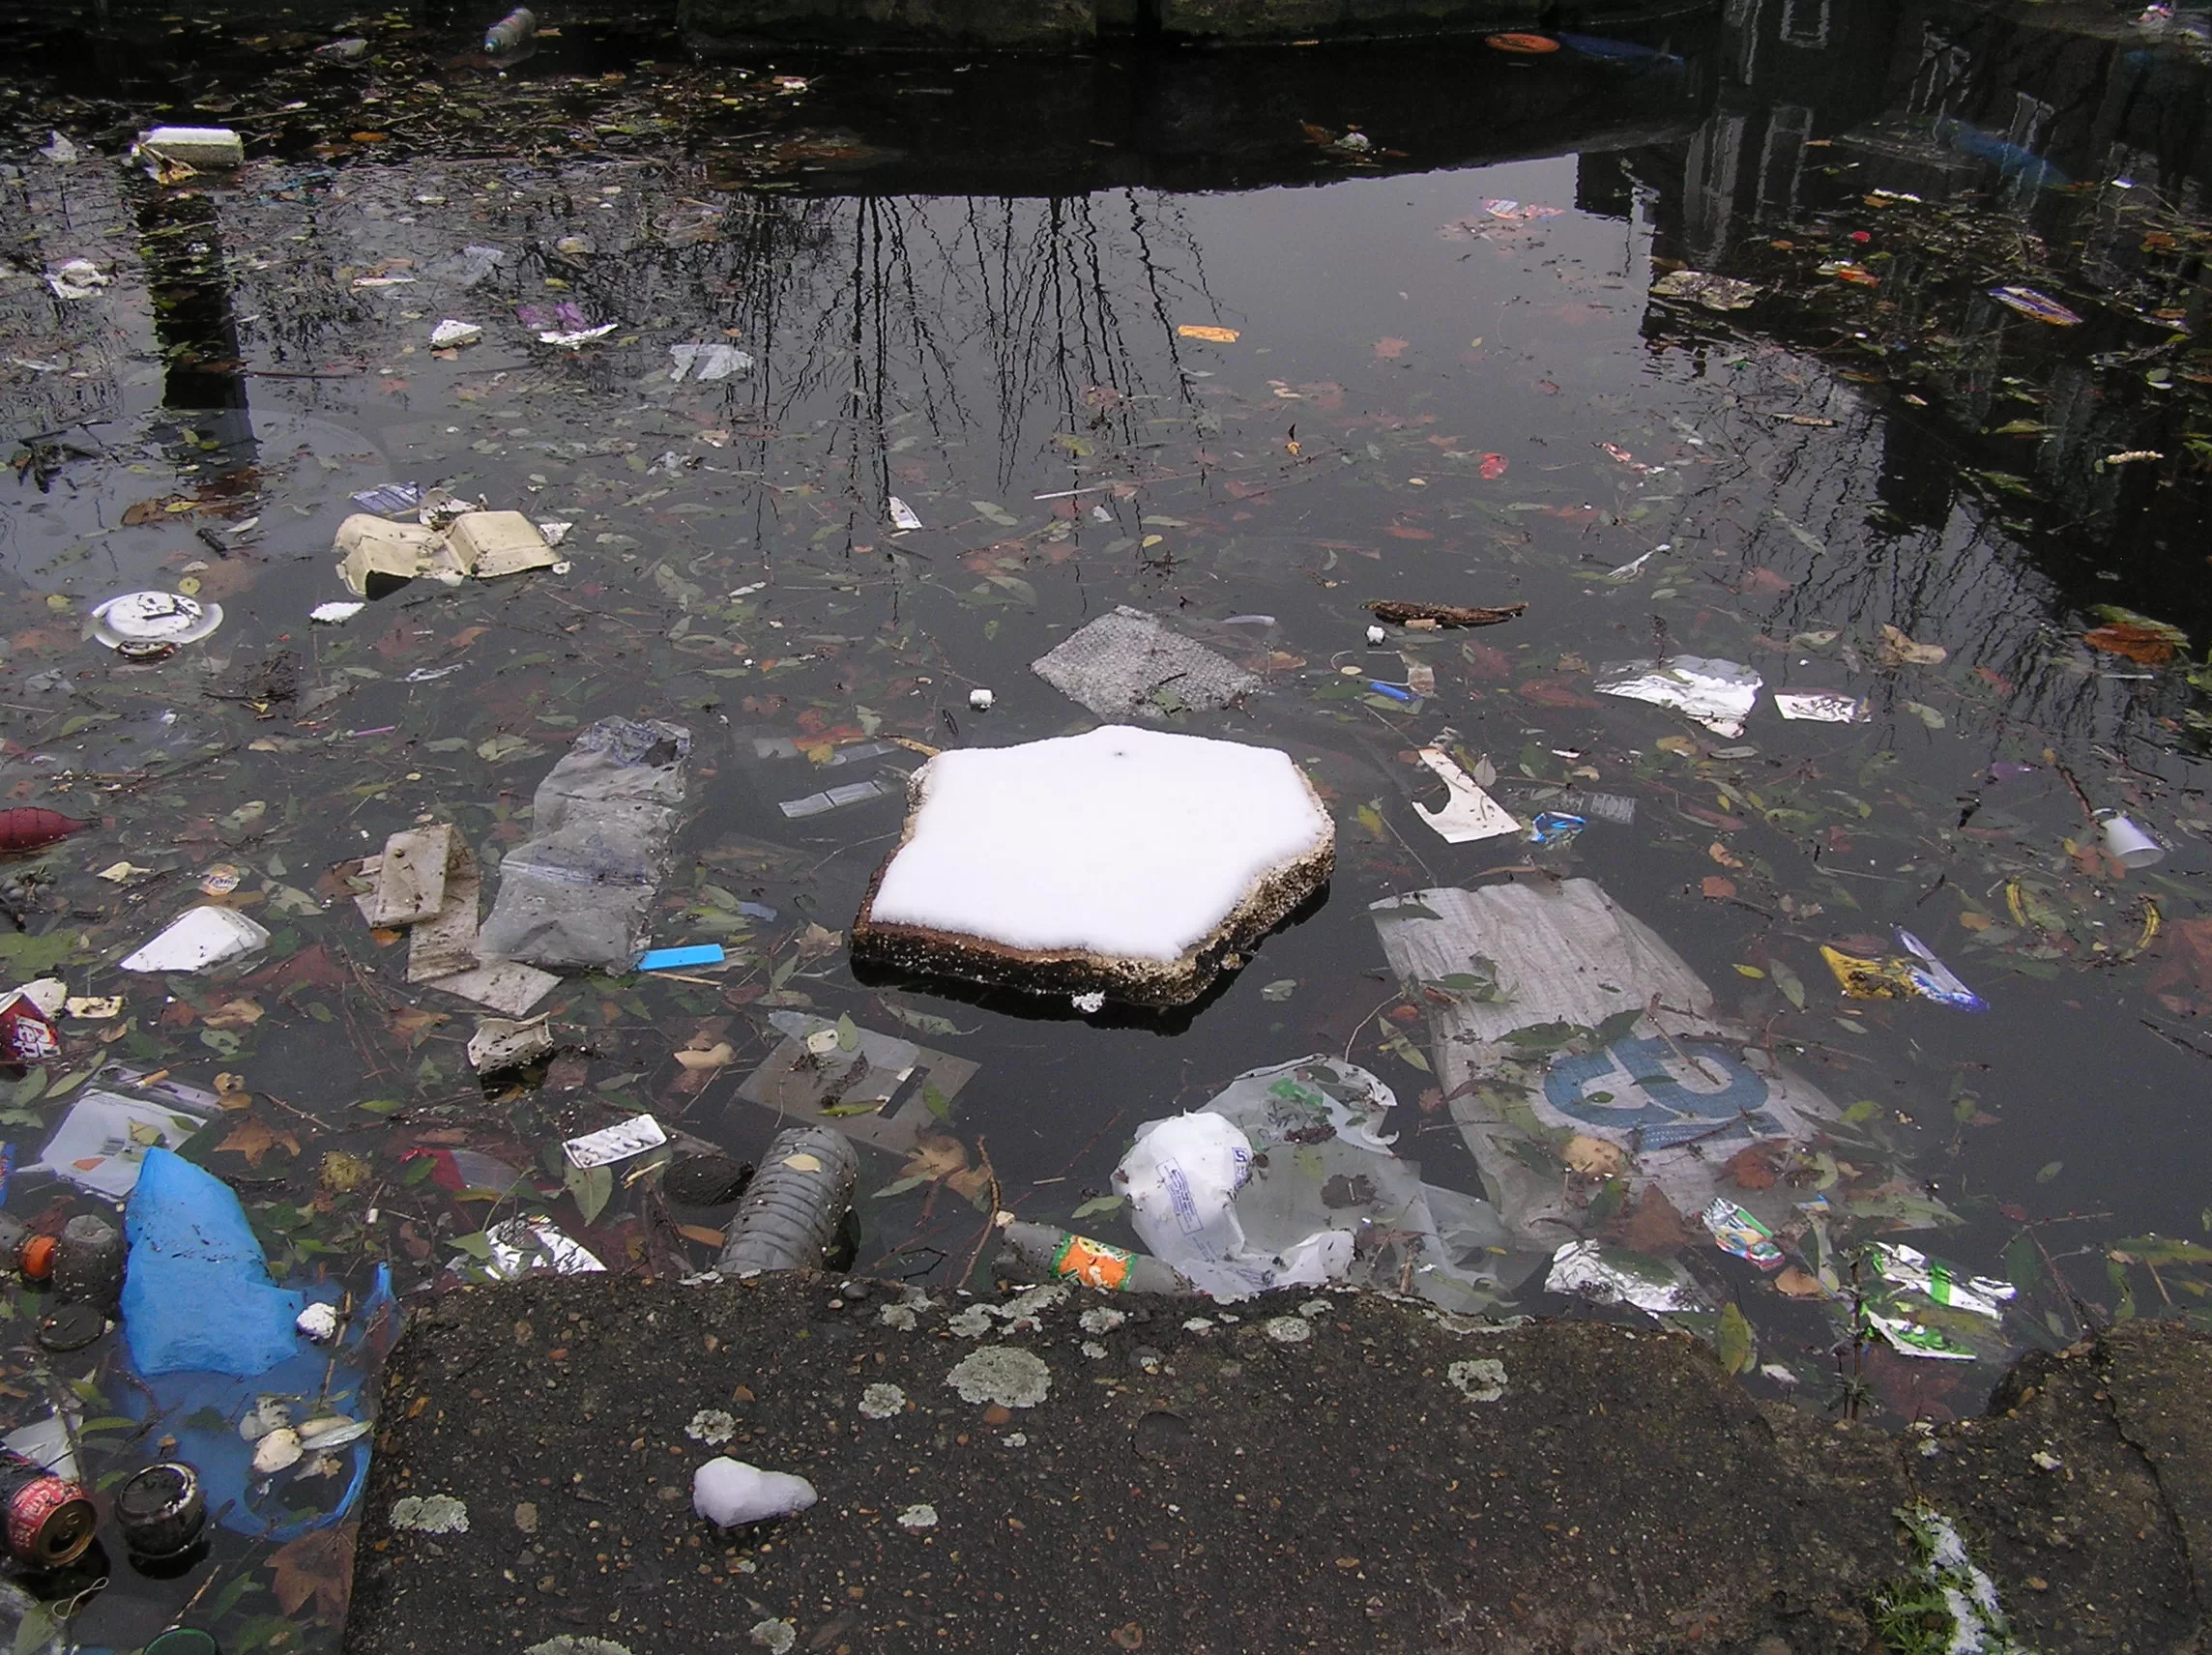 Photograph of white snowy polystyrene floating on filthy littered water by Abi Spendlove